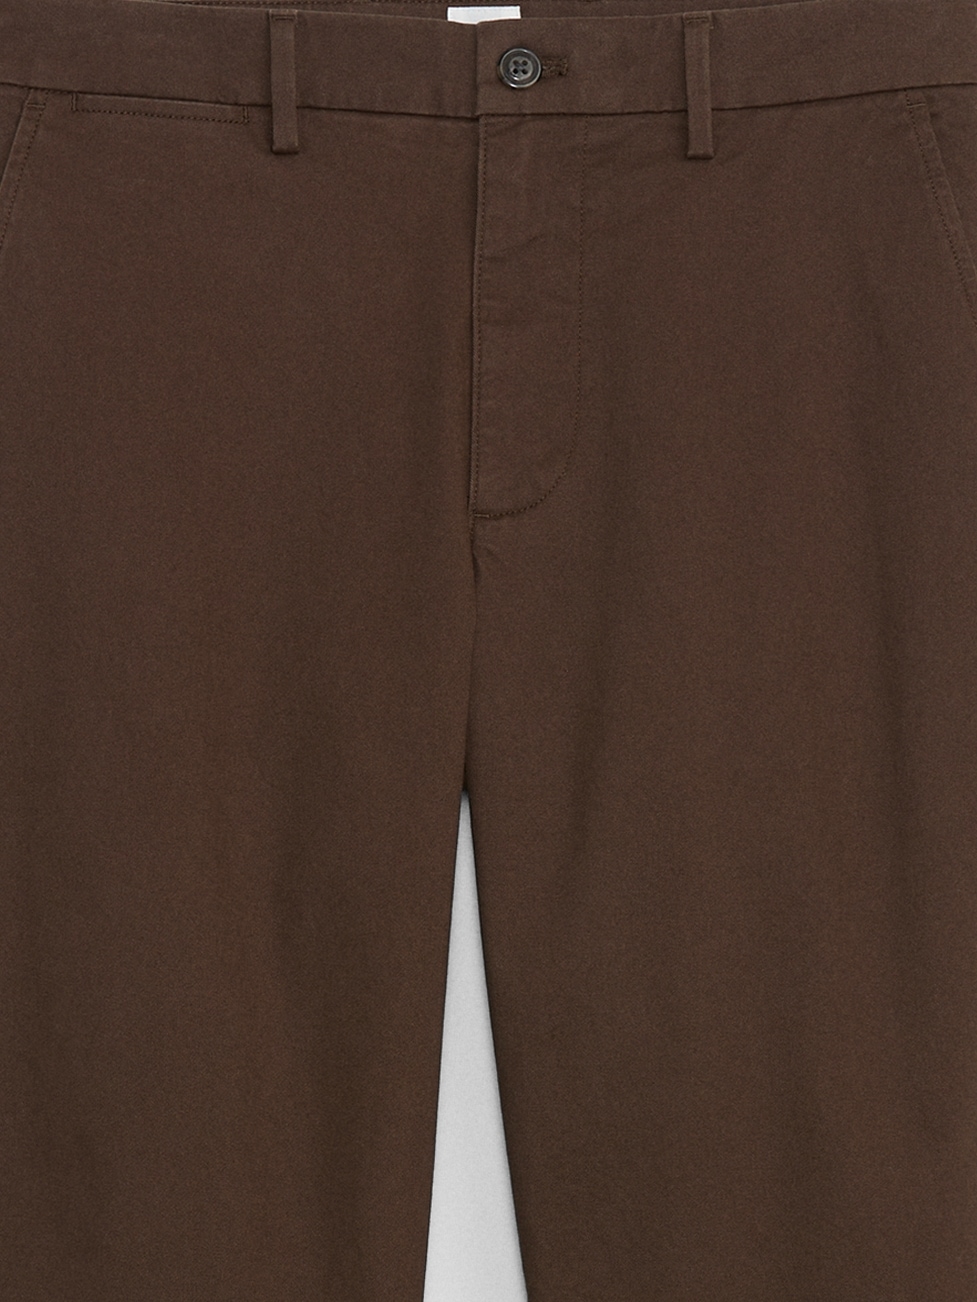 Gap Men's Modern Khakis in Slim Fit with GapFlex (Size 33X32) *New with  tags*